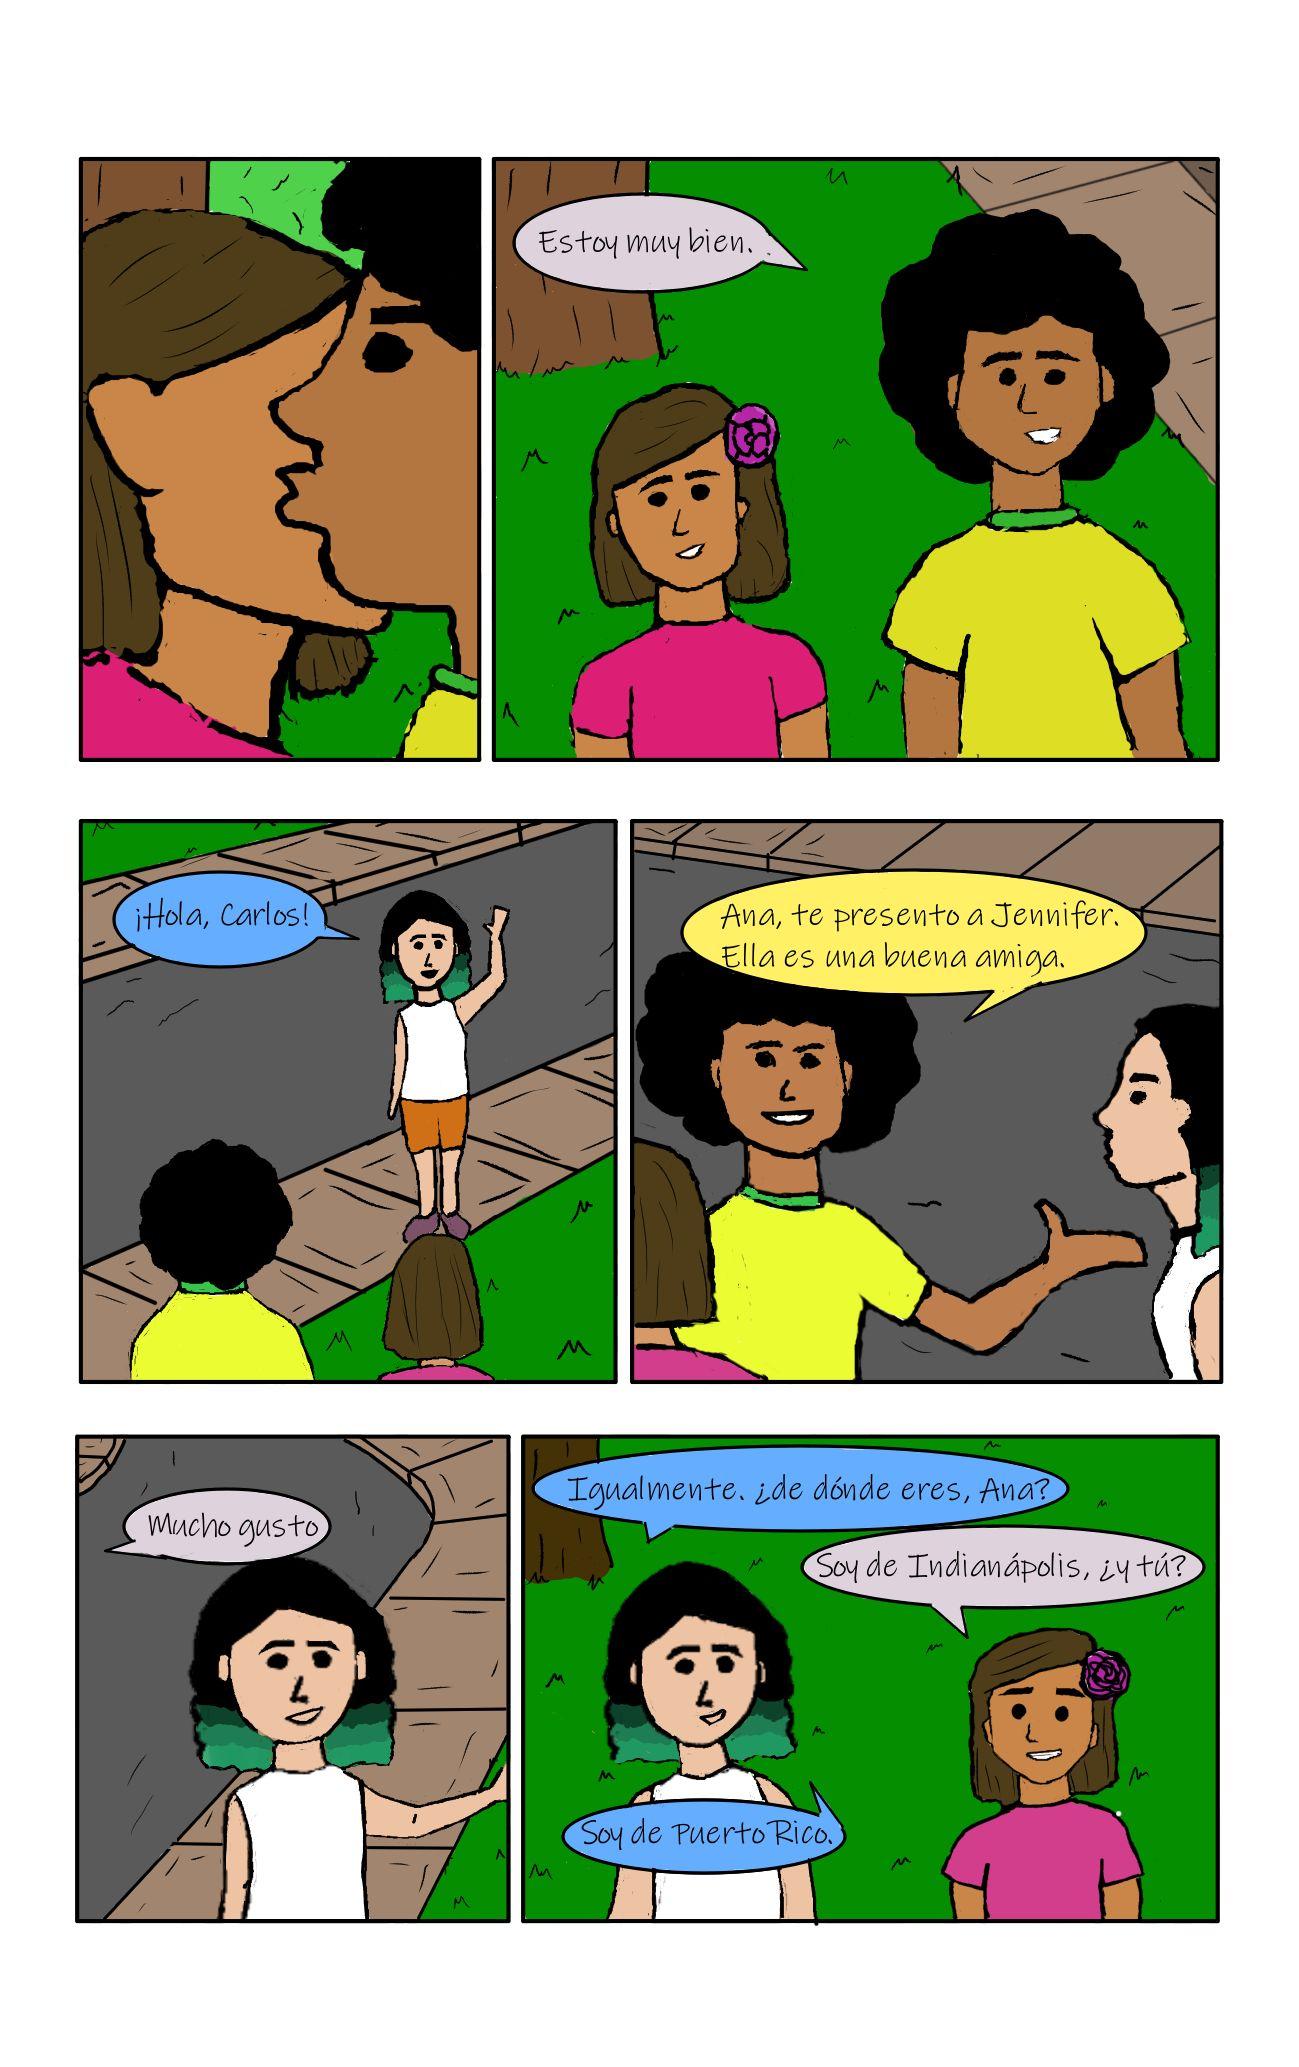 Panel 7: Carlos gives Ana a kiss on the cheek in greeting. Panel 8: Ana says, "Estoy muy bien." Panel 9: A girl in a white shirt with black hair dyed teal at the bottom waves to Carlos from the sidewalk. "¡Hola, Carlos!" Panel 10: Carlos gestures to the girl in white. "Ana, te presento a Jennifer. Ella es una buena amiga." Panel 11: Jennifer smiles. Off-panel, Ana says, "Mucho gusto." Panel 12: Jennifer says, "Igualmente. ¿de dónde eres, Ana?" Ana responds with, "Soy de Indianápolis, ¿y tú?" Jennifer says, "Soy de Puerto Rico."